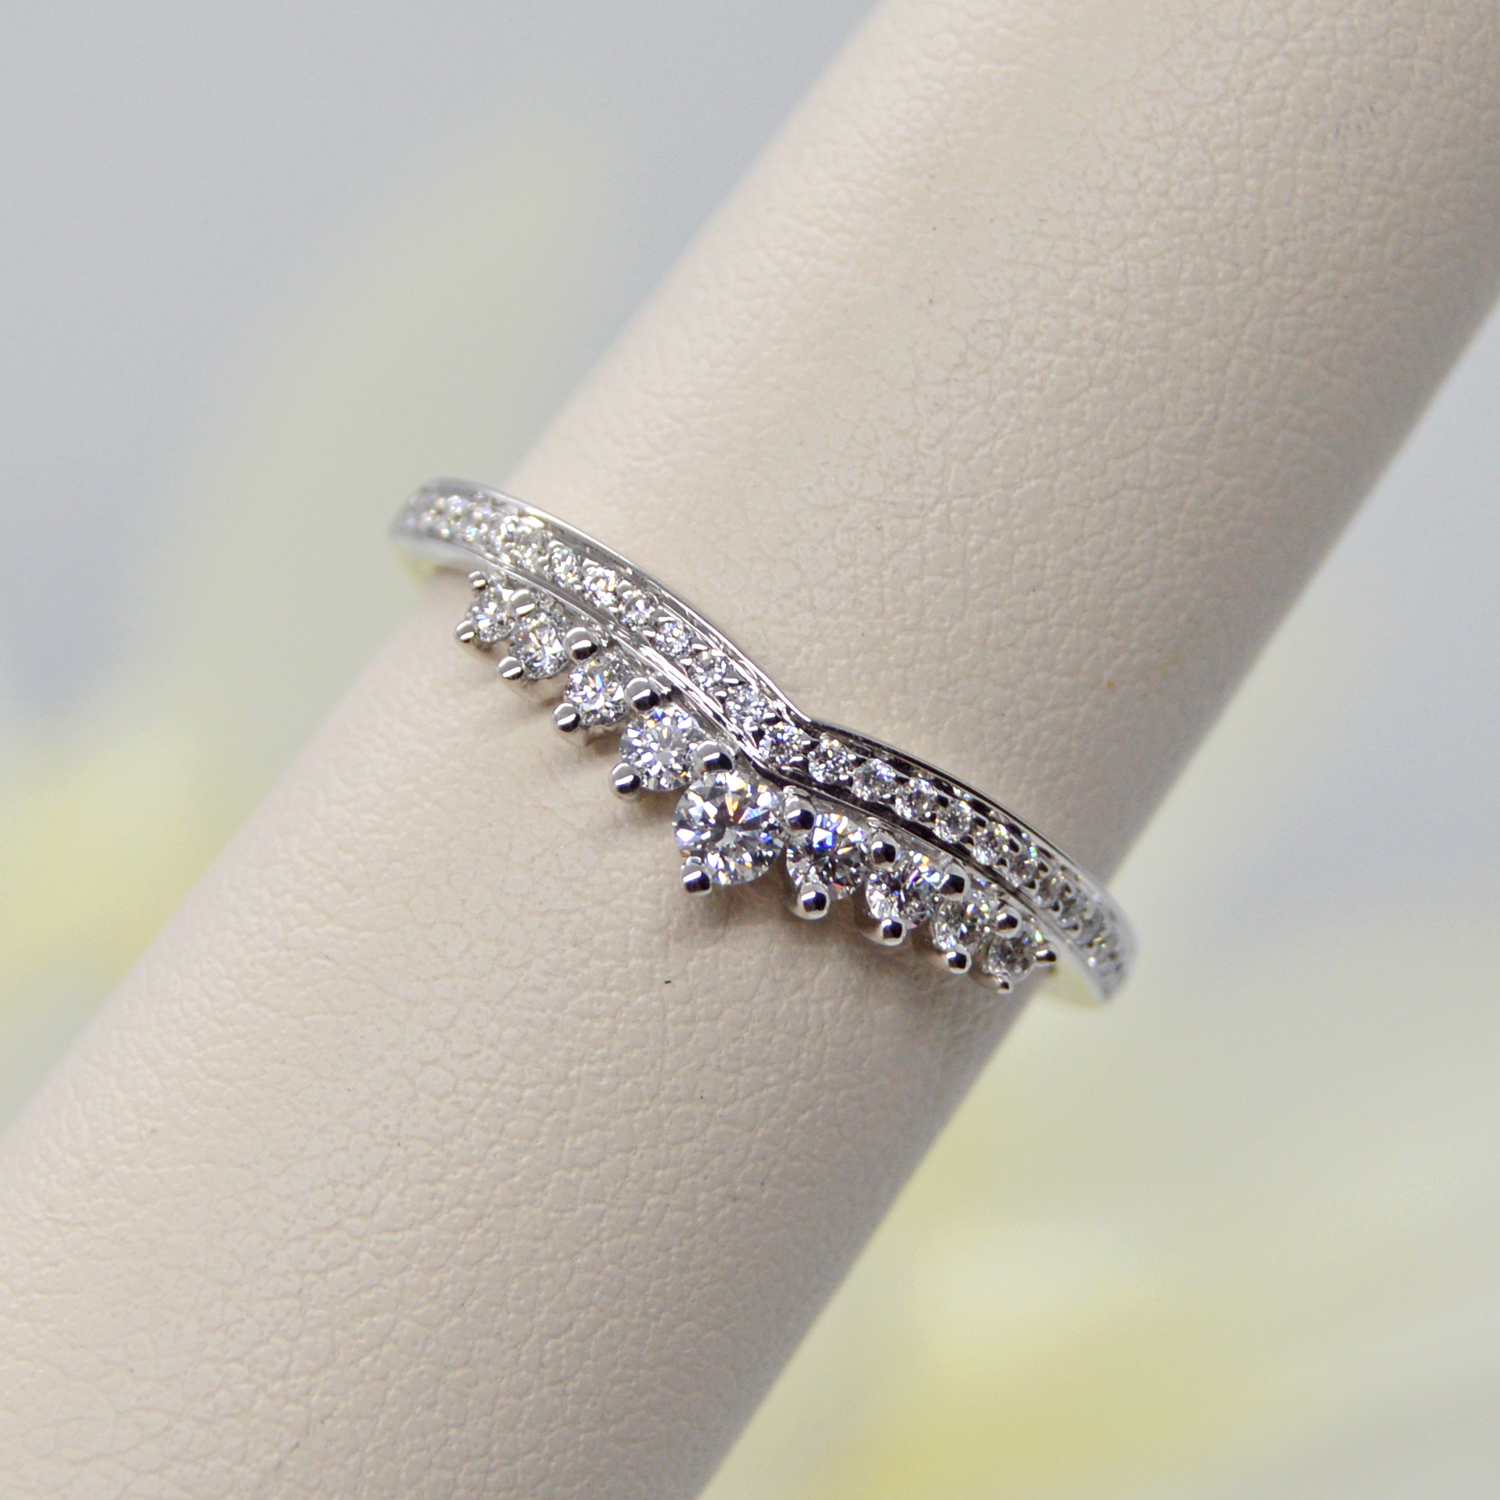 14k white gold ring with v shape shadow band for wedding band, graduated diamonds prong set designed by Allison Kaufman